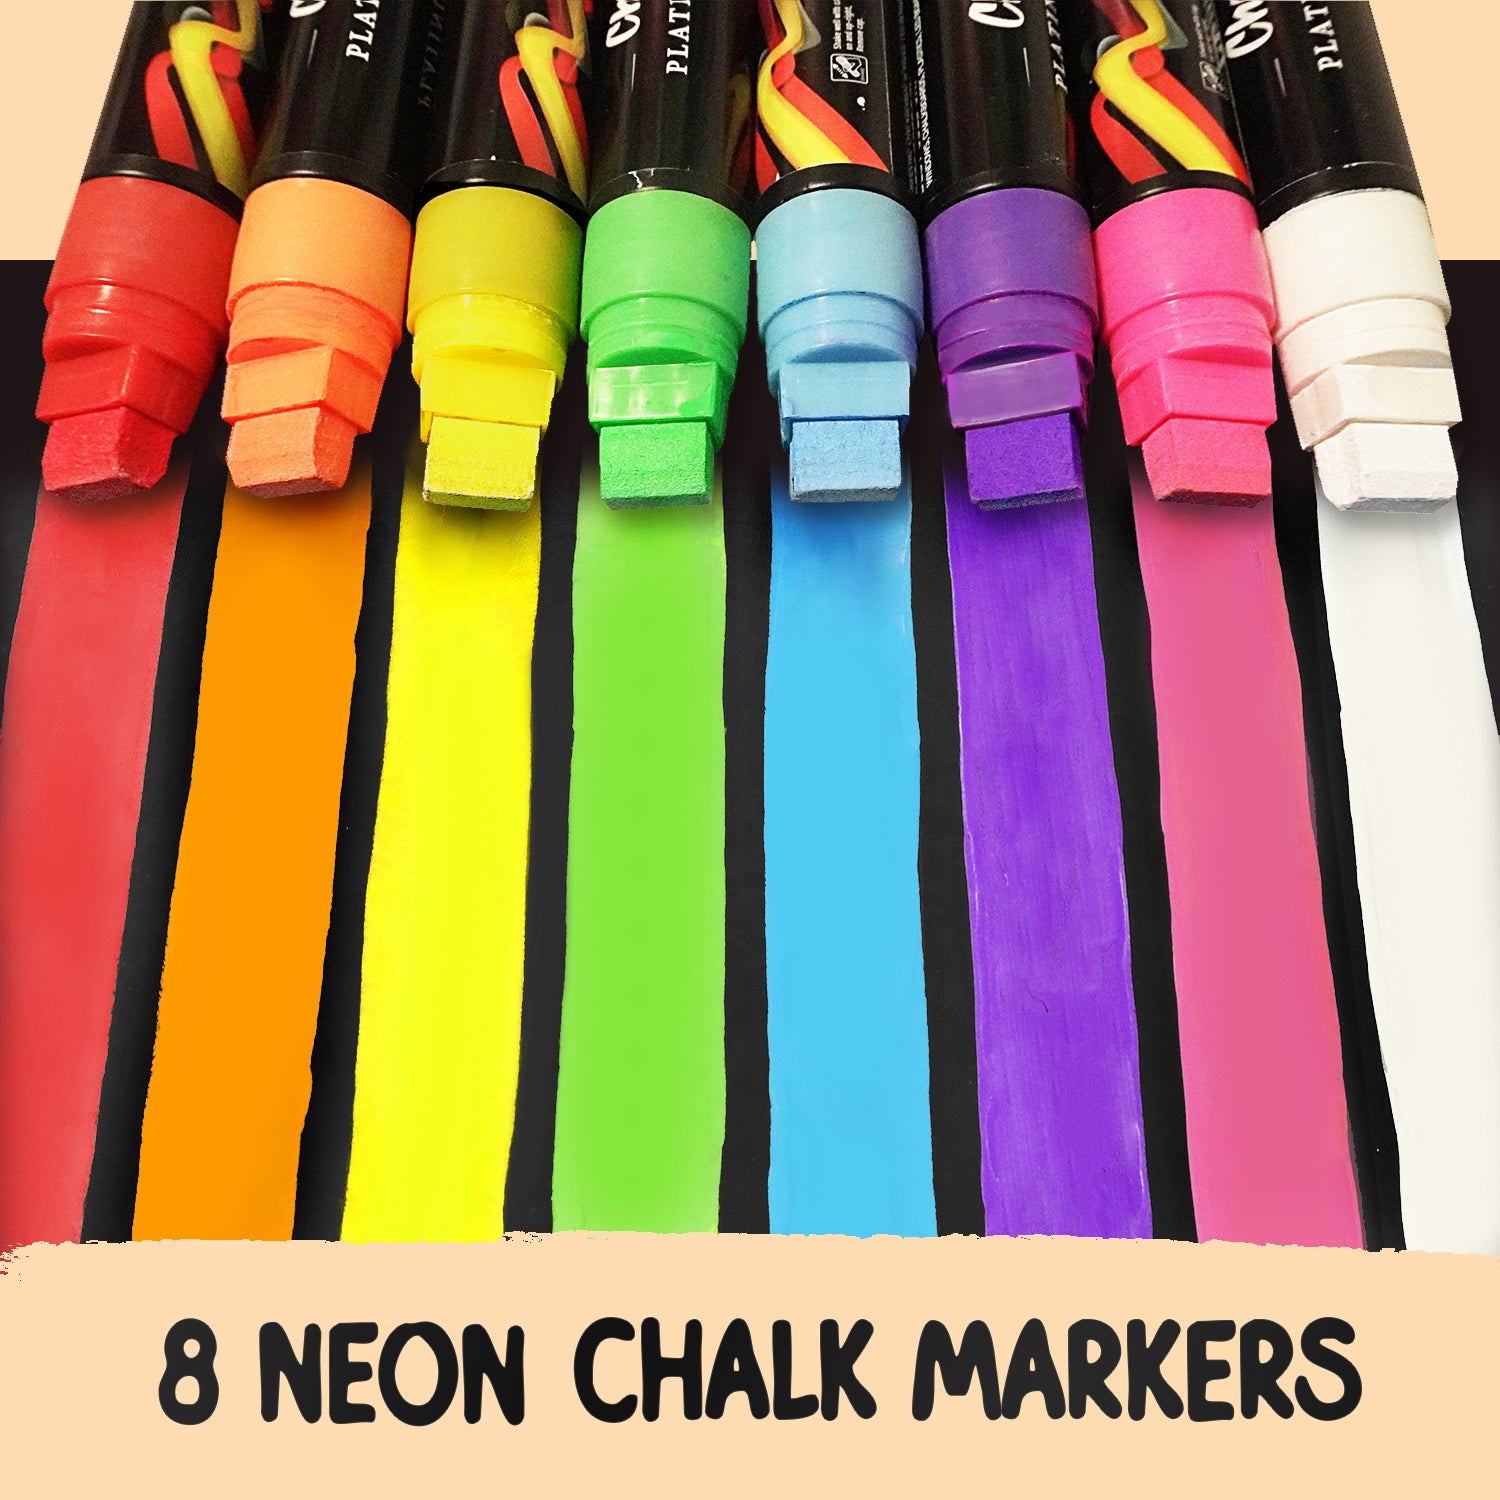 GOTIDEAL 12 Colors Jumbo Window Markers, Bold Car Markers